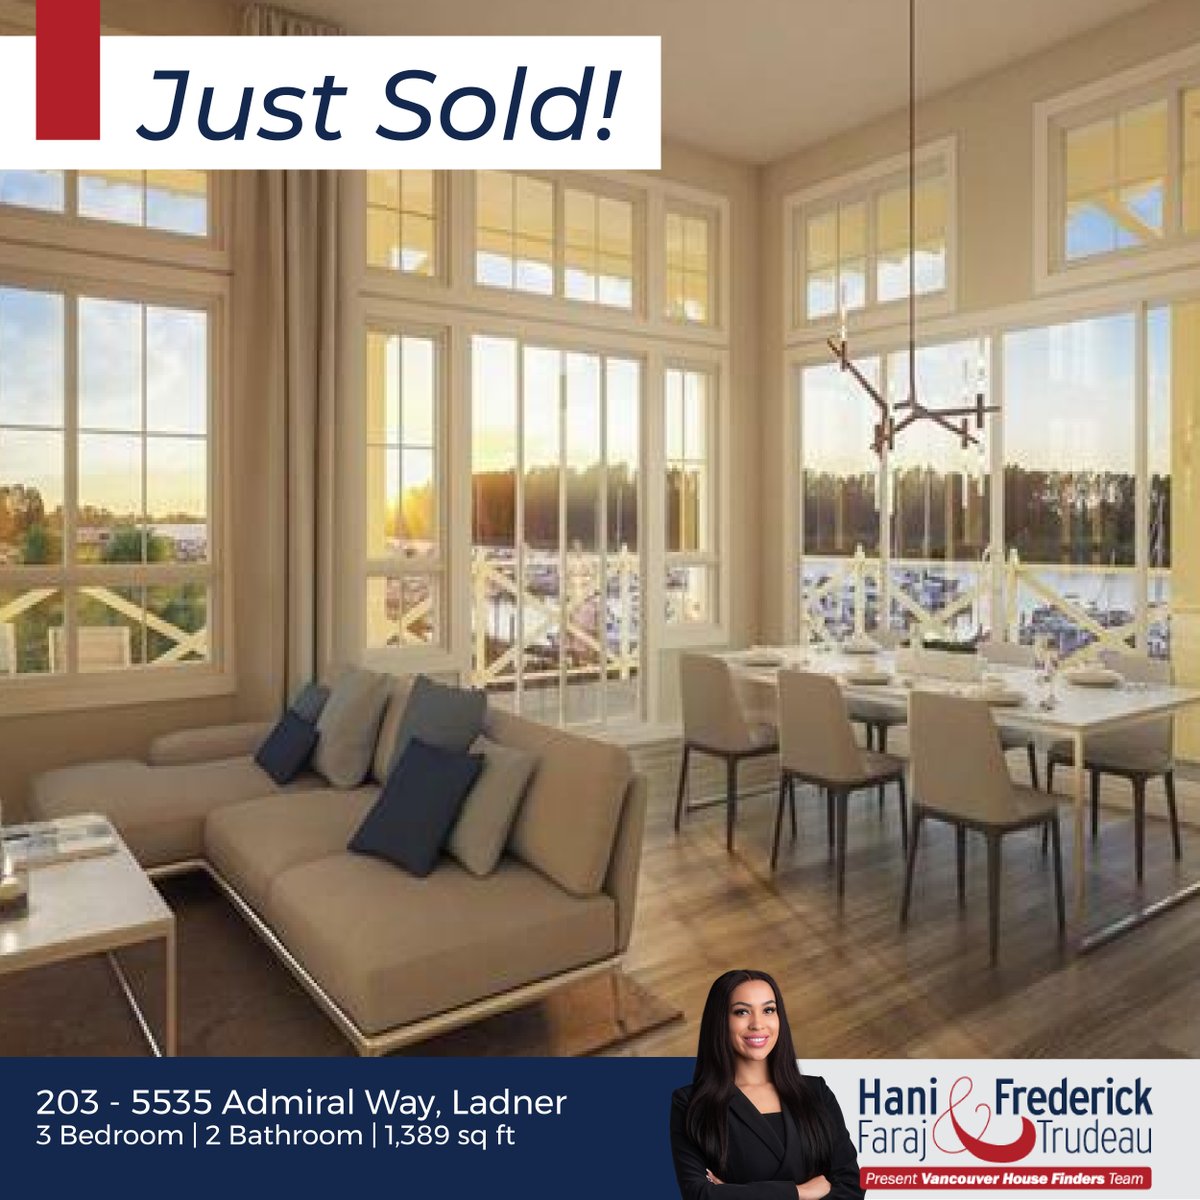 #SOLD !!! Congratulations to our buyers! 

Work with a team that treats you like a VIP. Give us a call today!
(778) 800-2587

#bcrealestate #sunset #ladnerbc